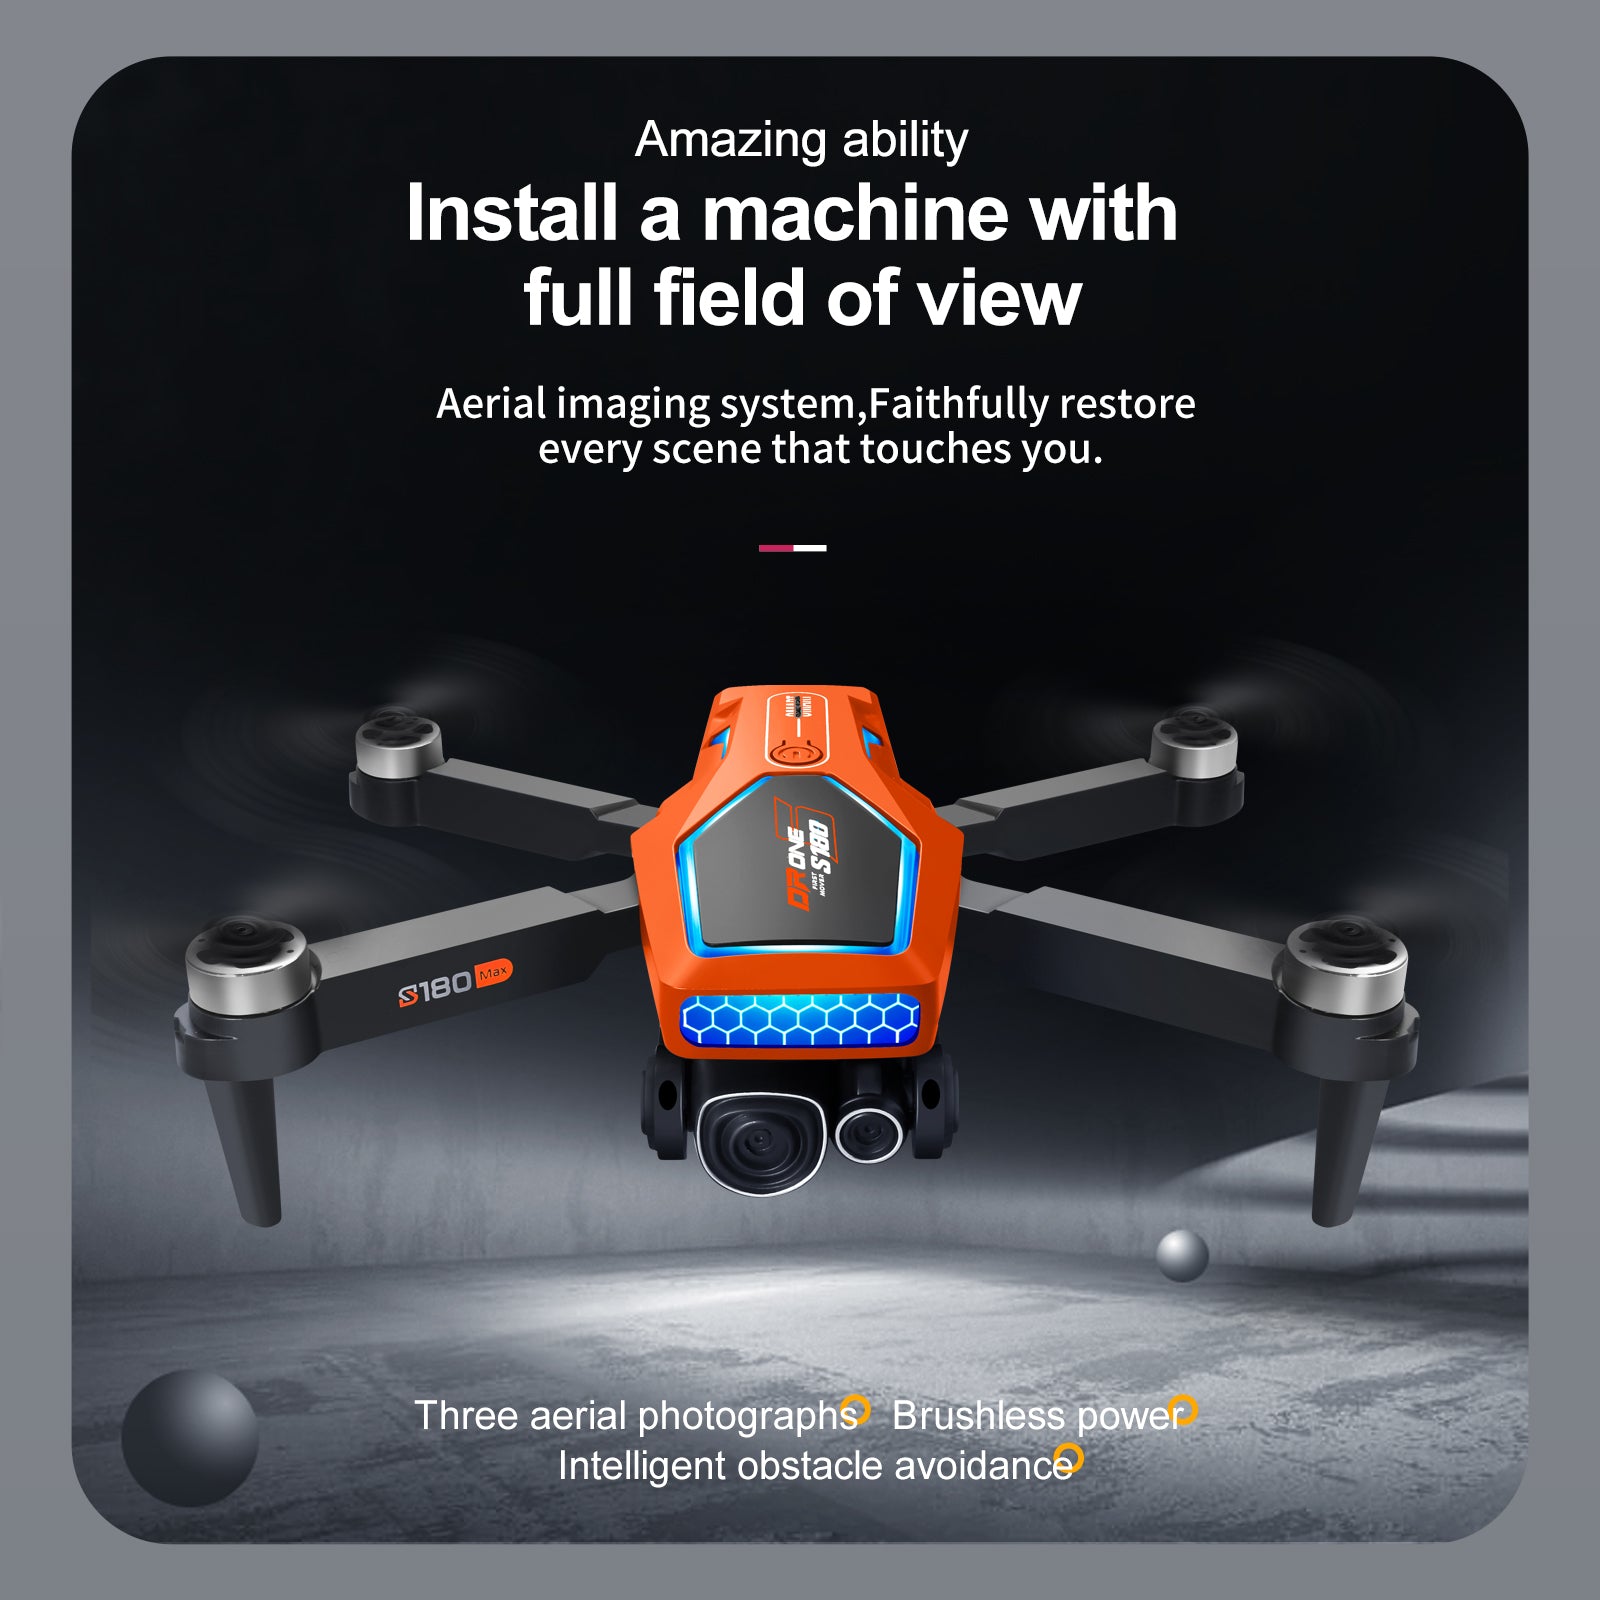 S180 Drone, Capture life's moments with ease using this drone with wide view, 3-in-1 photography, and smart obstacle avoidance.